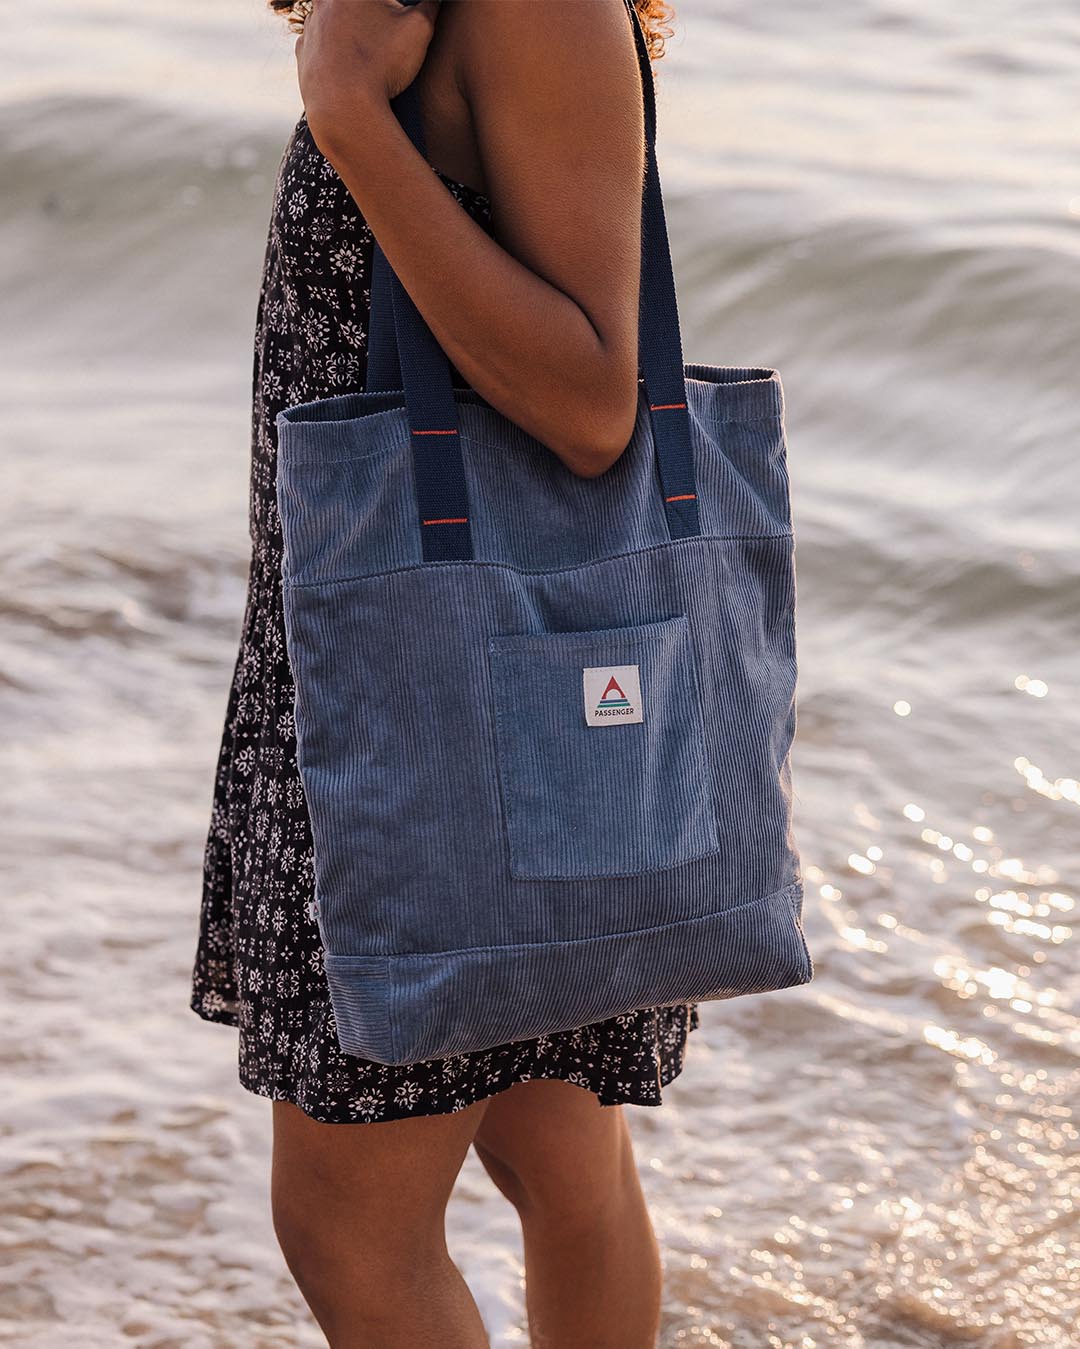 Evergreen Recycled Cord Tote Bag - Stone Blue